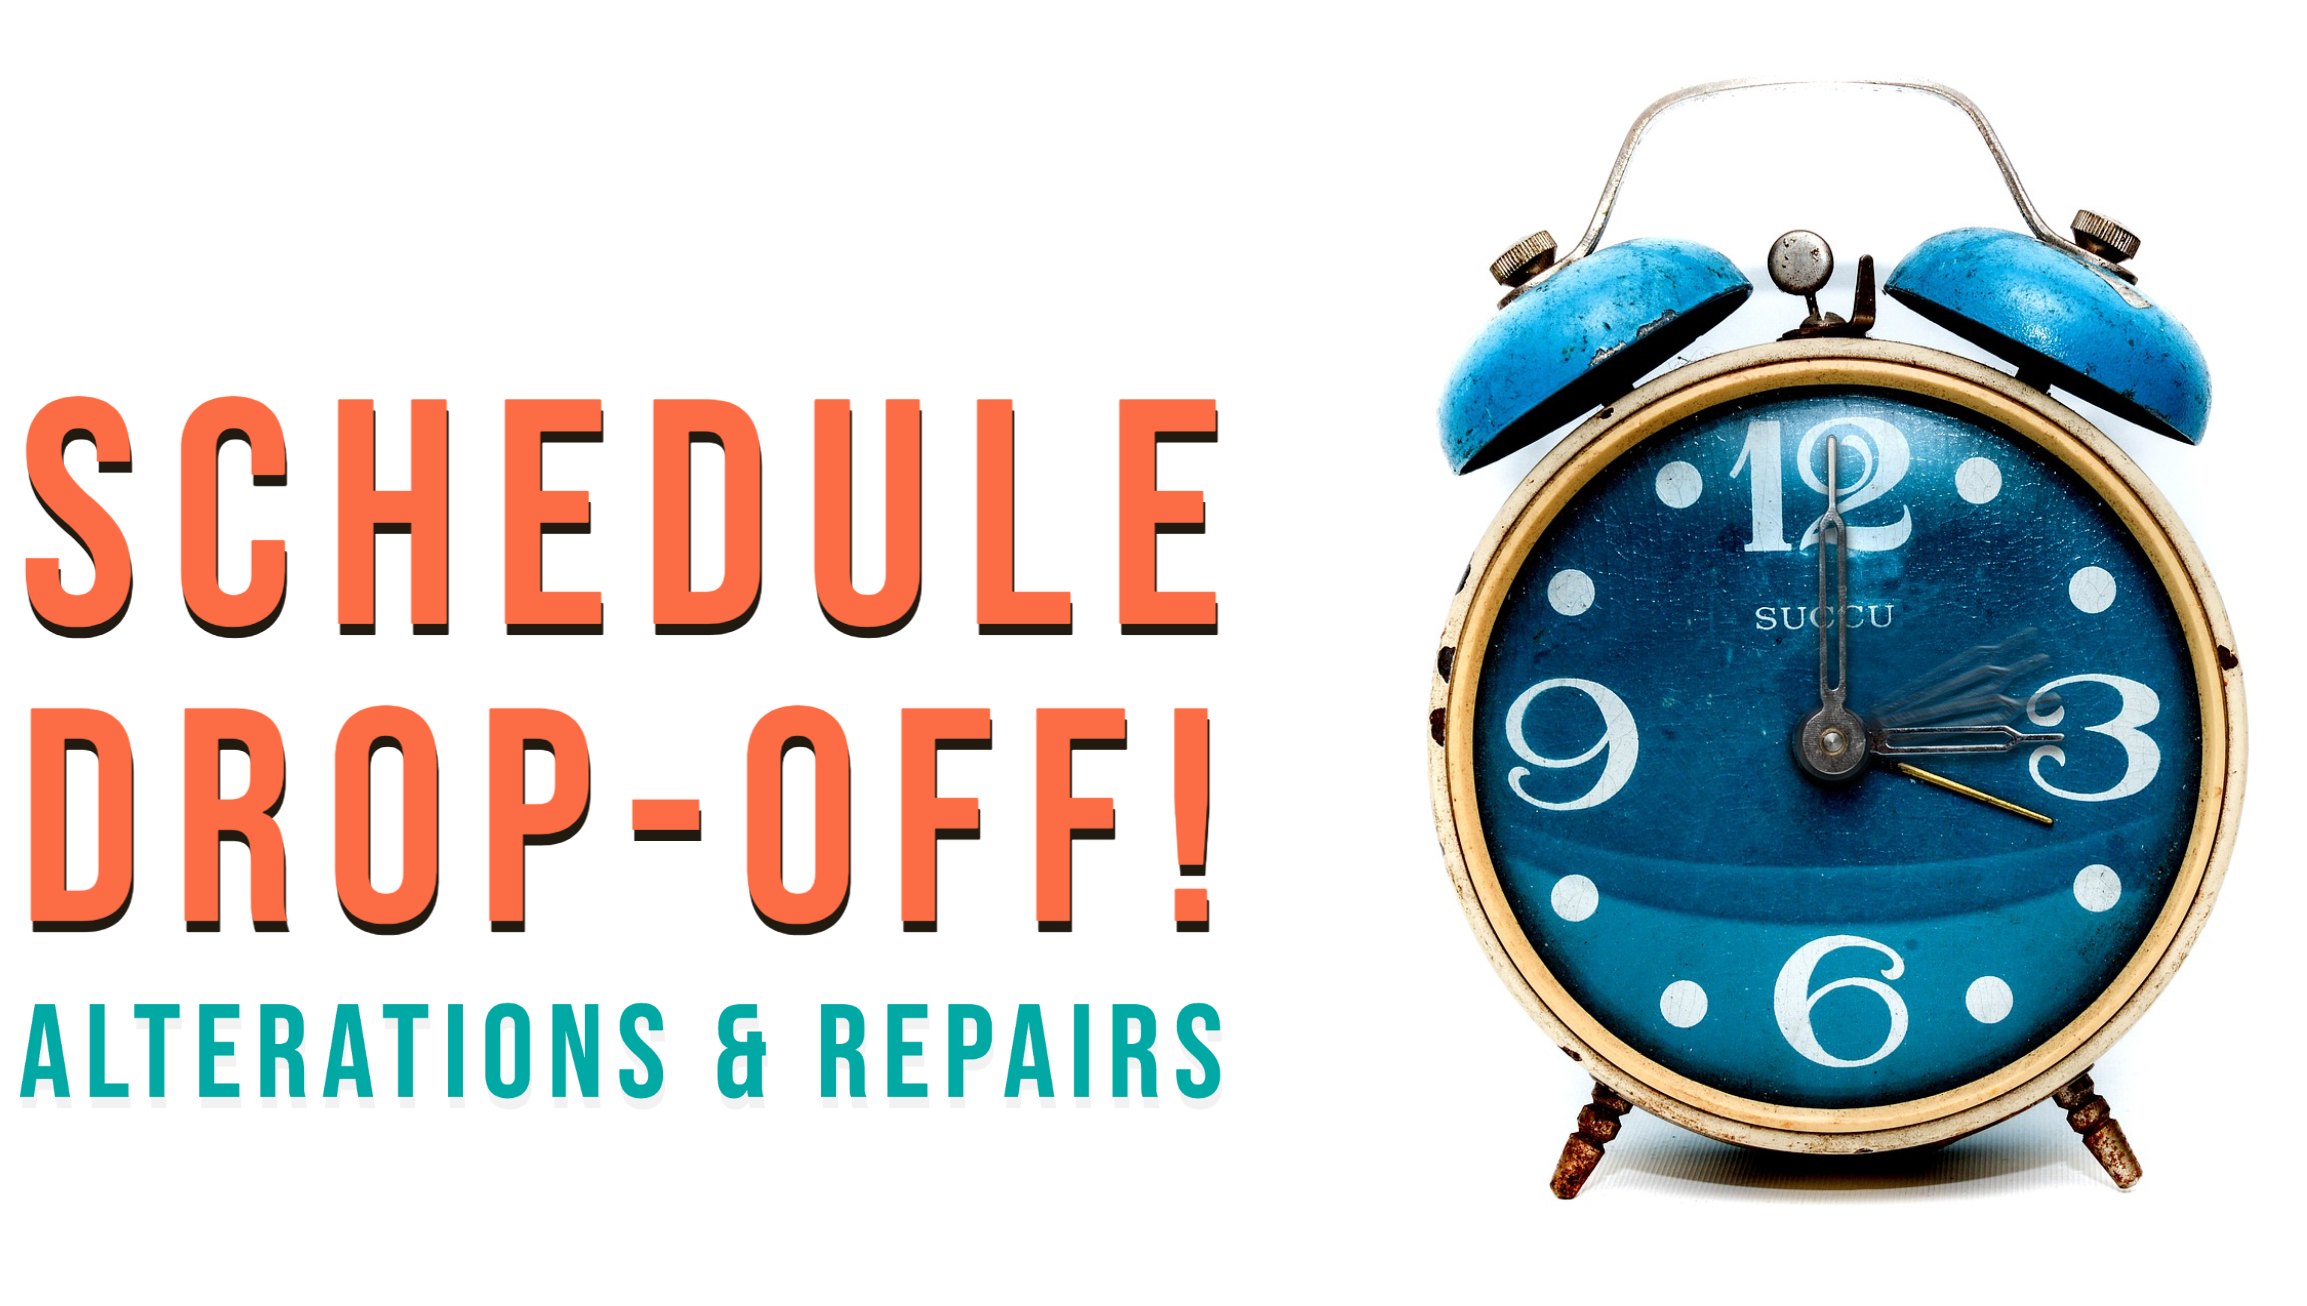 Schedule Drop Off for Services | Alterations & Repairs | Stacey Sansom